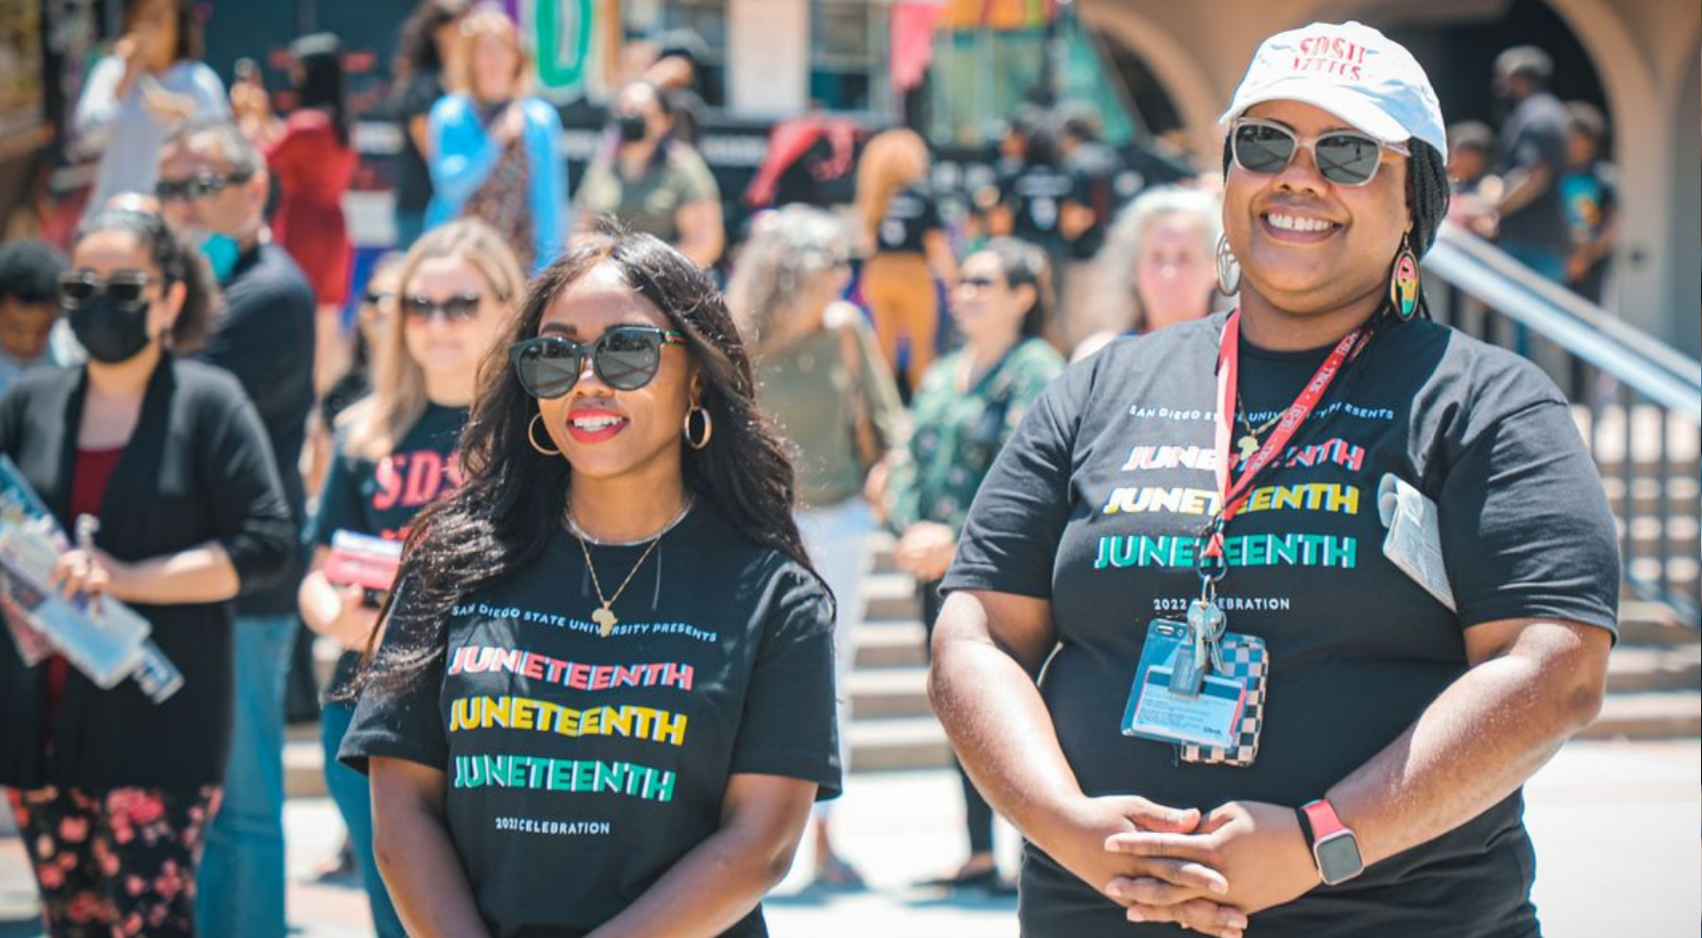 Students, staff and faculty join the Juneteenth Celebration at SDSU. This year's event takes place June 16 at Conrad Prebys Aztec Student Union.